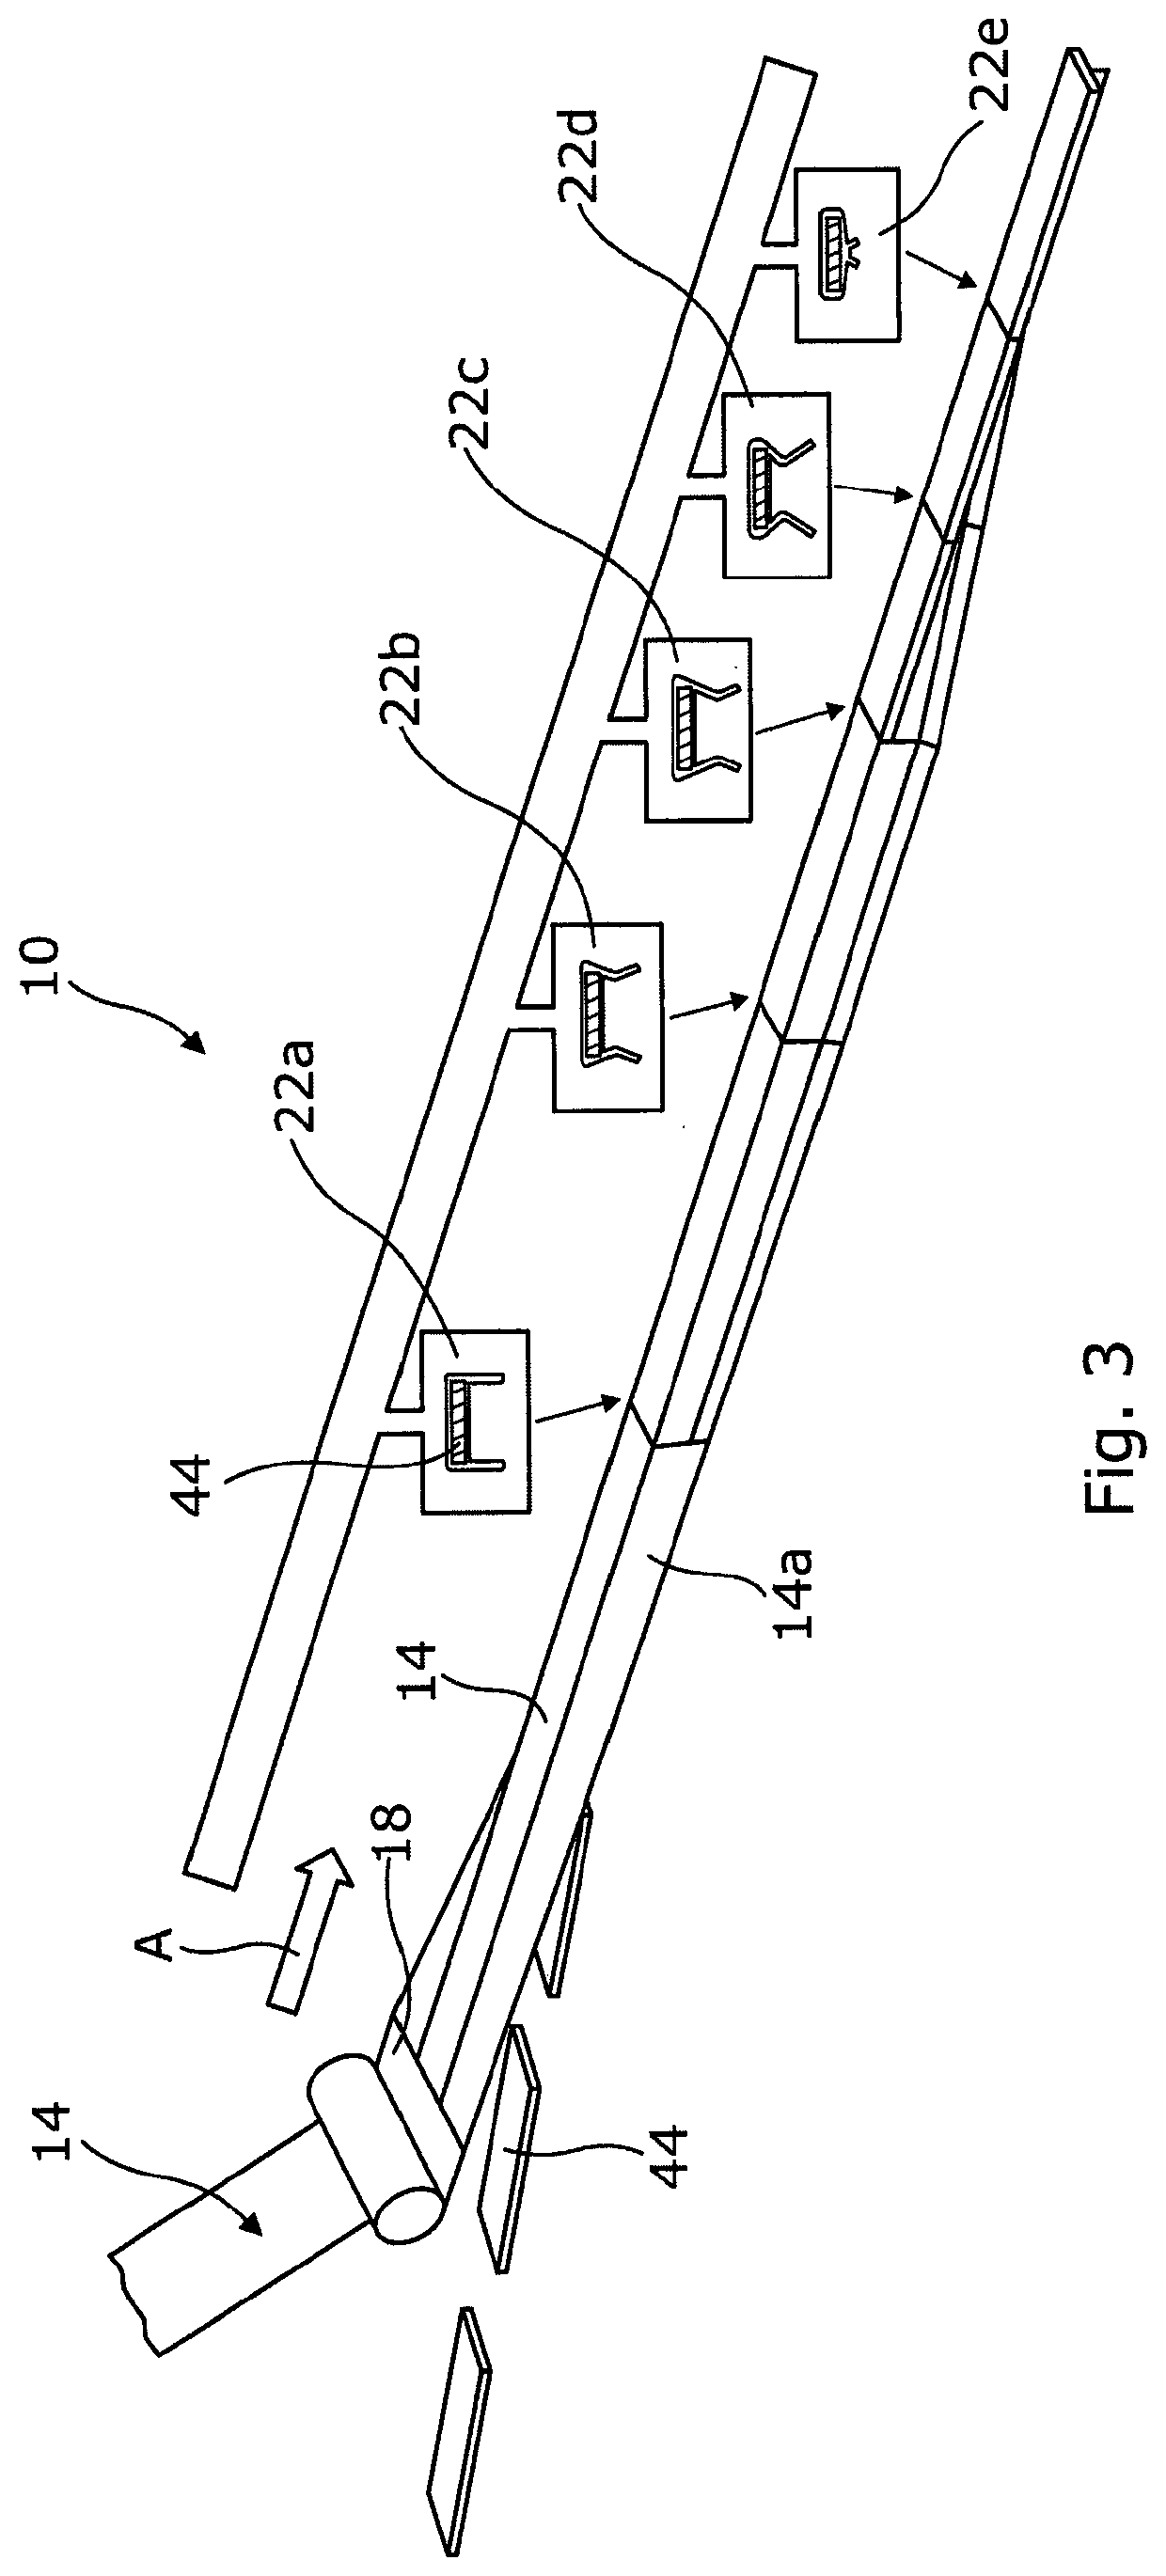 Apparatus and methods for producing tubular packages